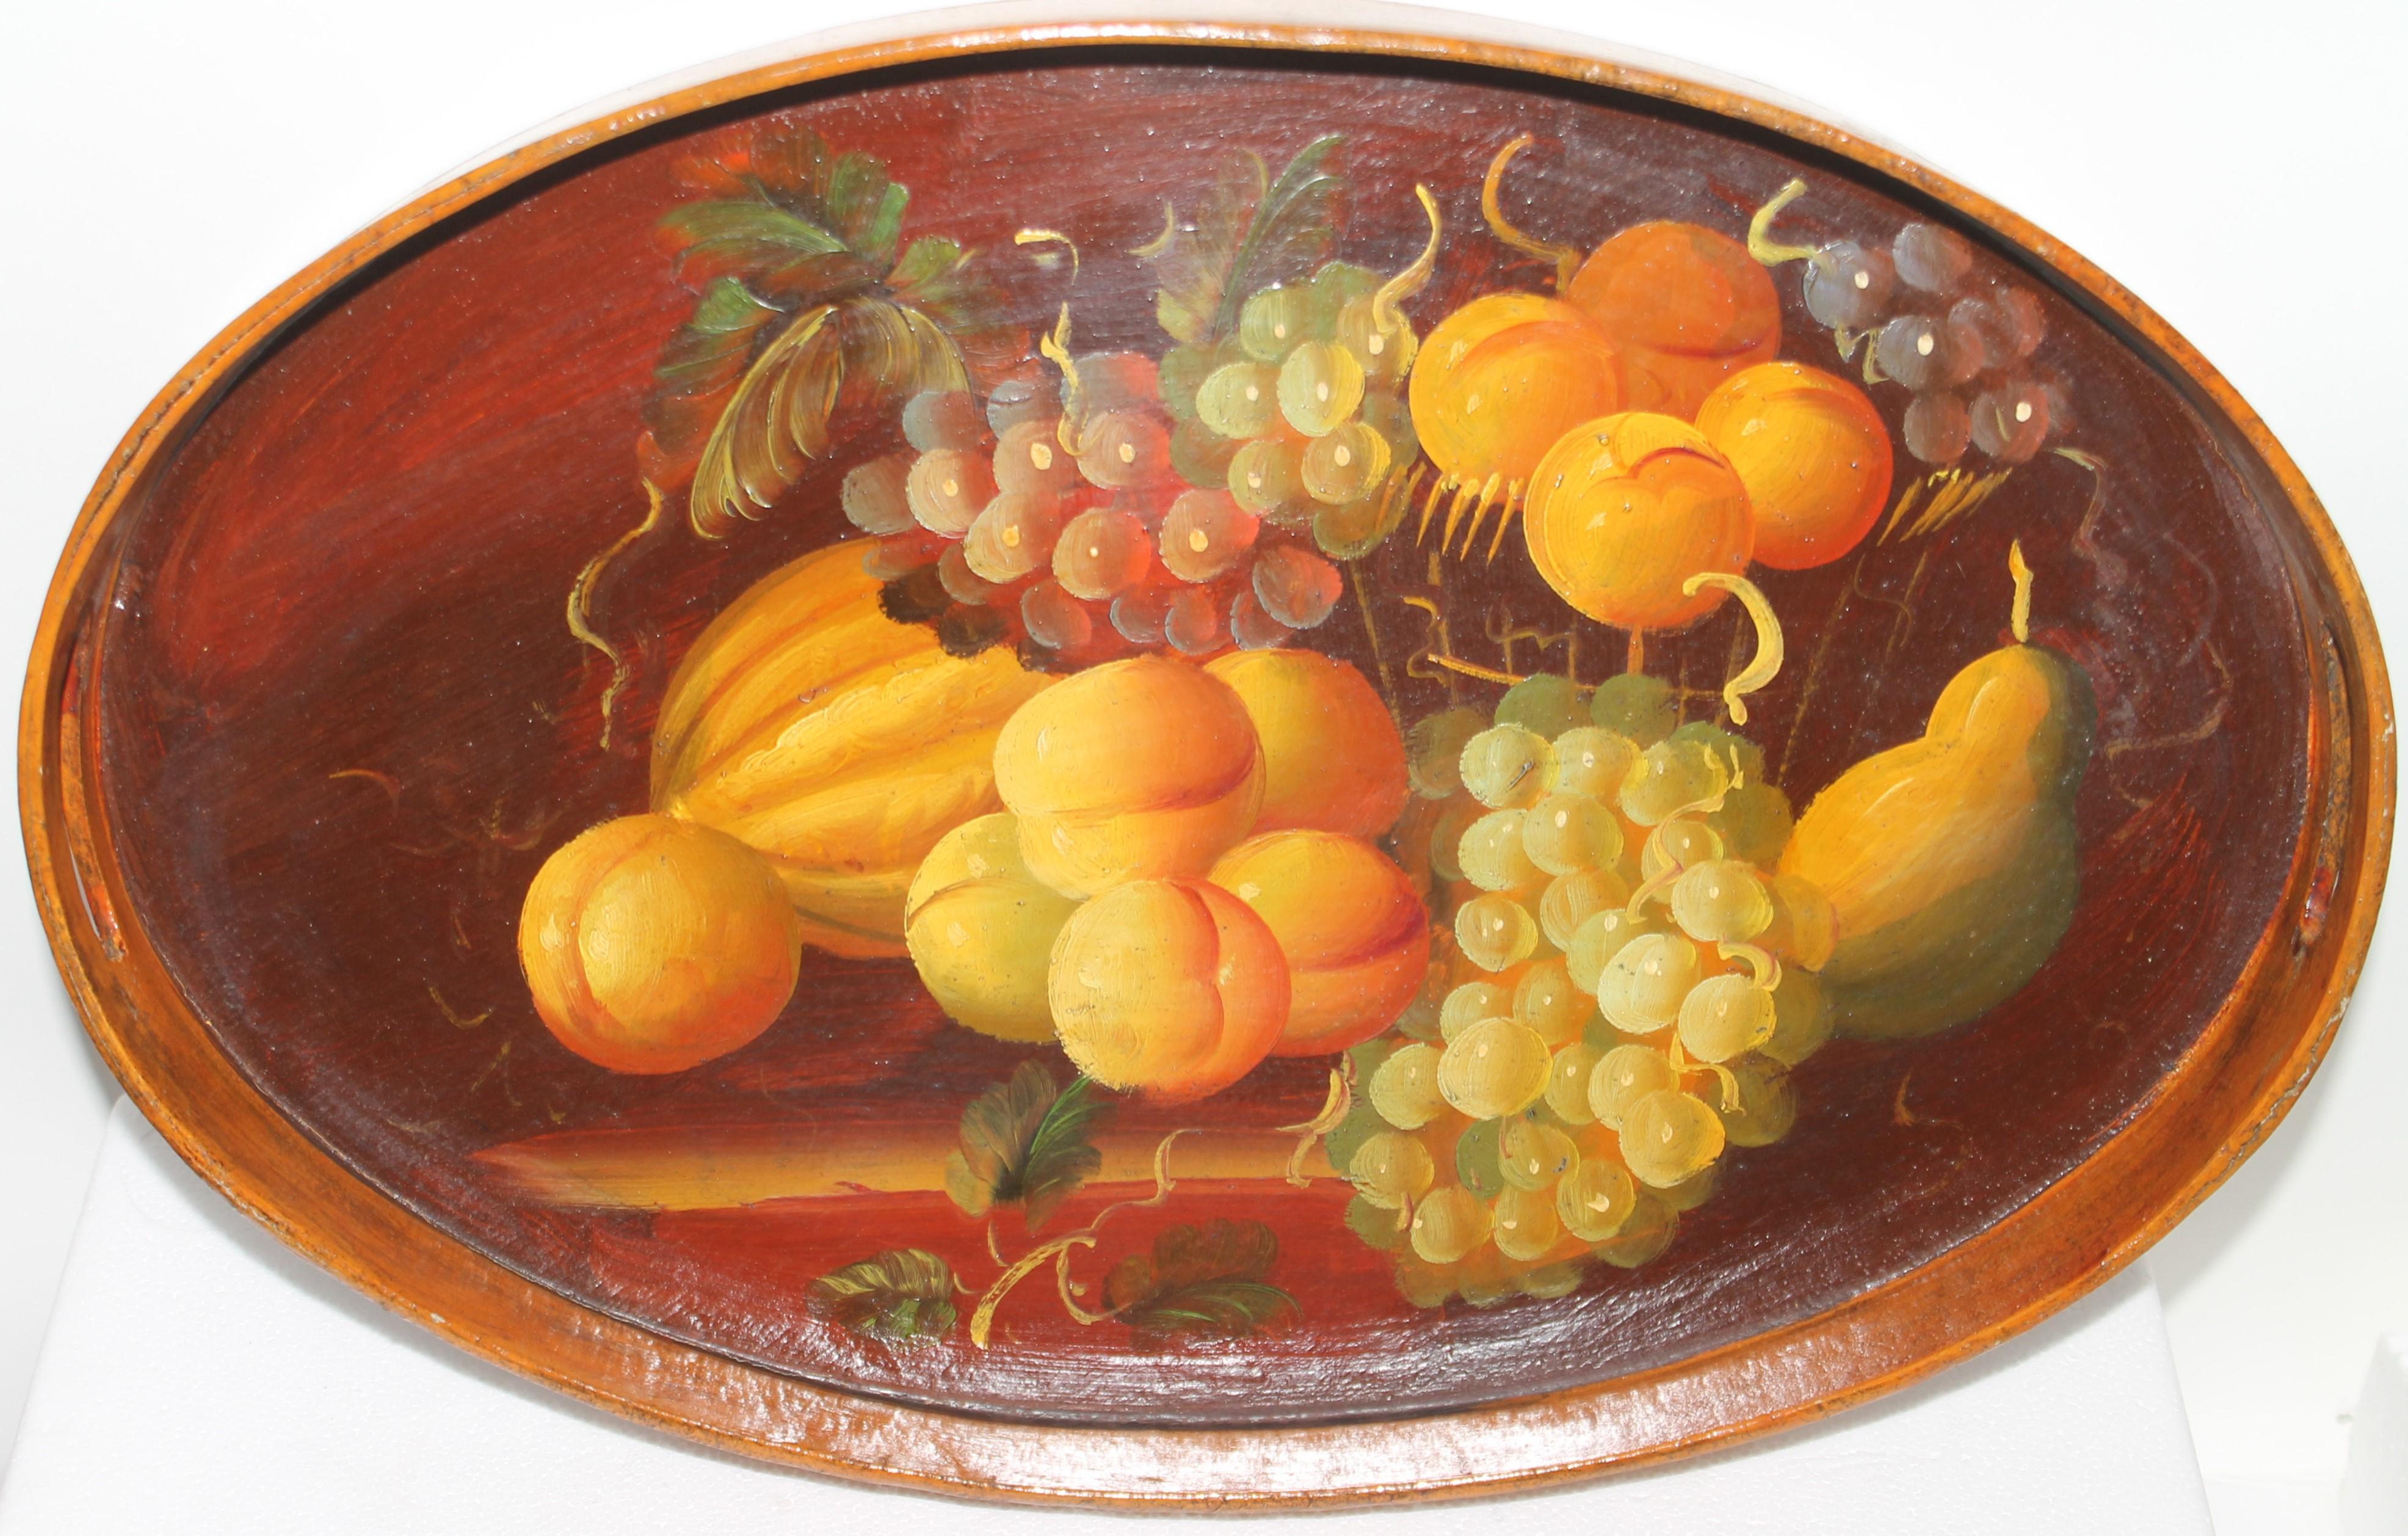 Hand painted wood fruit serving tray with double handles. The condition is very good. It looks like a very well done still life.